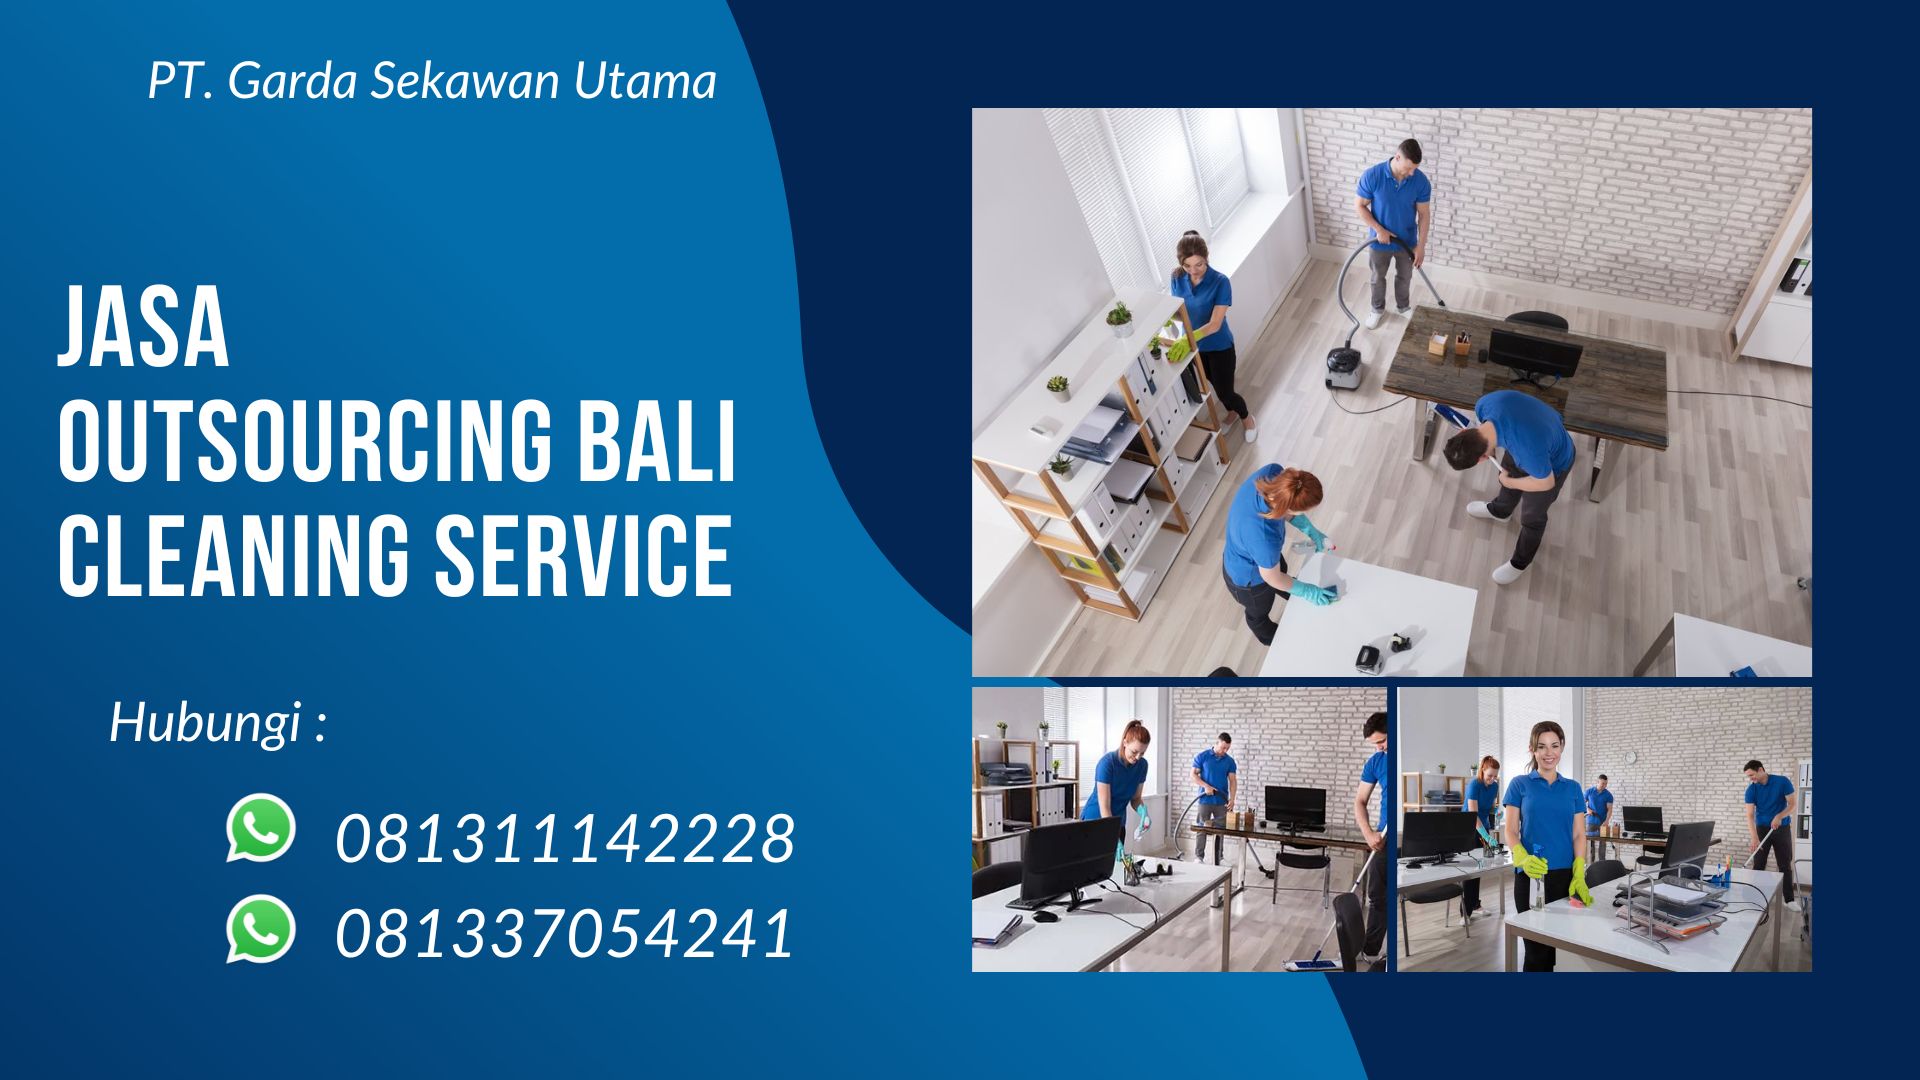 Tempat Jasa Outsourcing Cleaning Services Bali Profesional